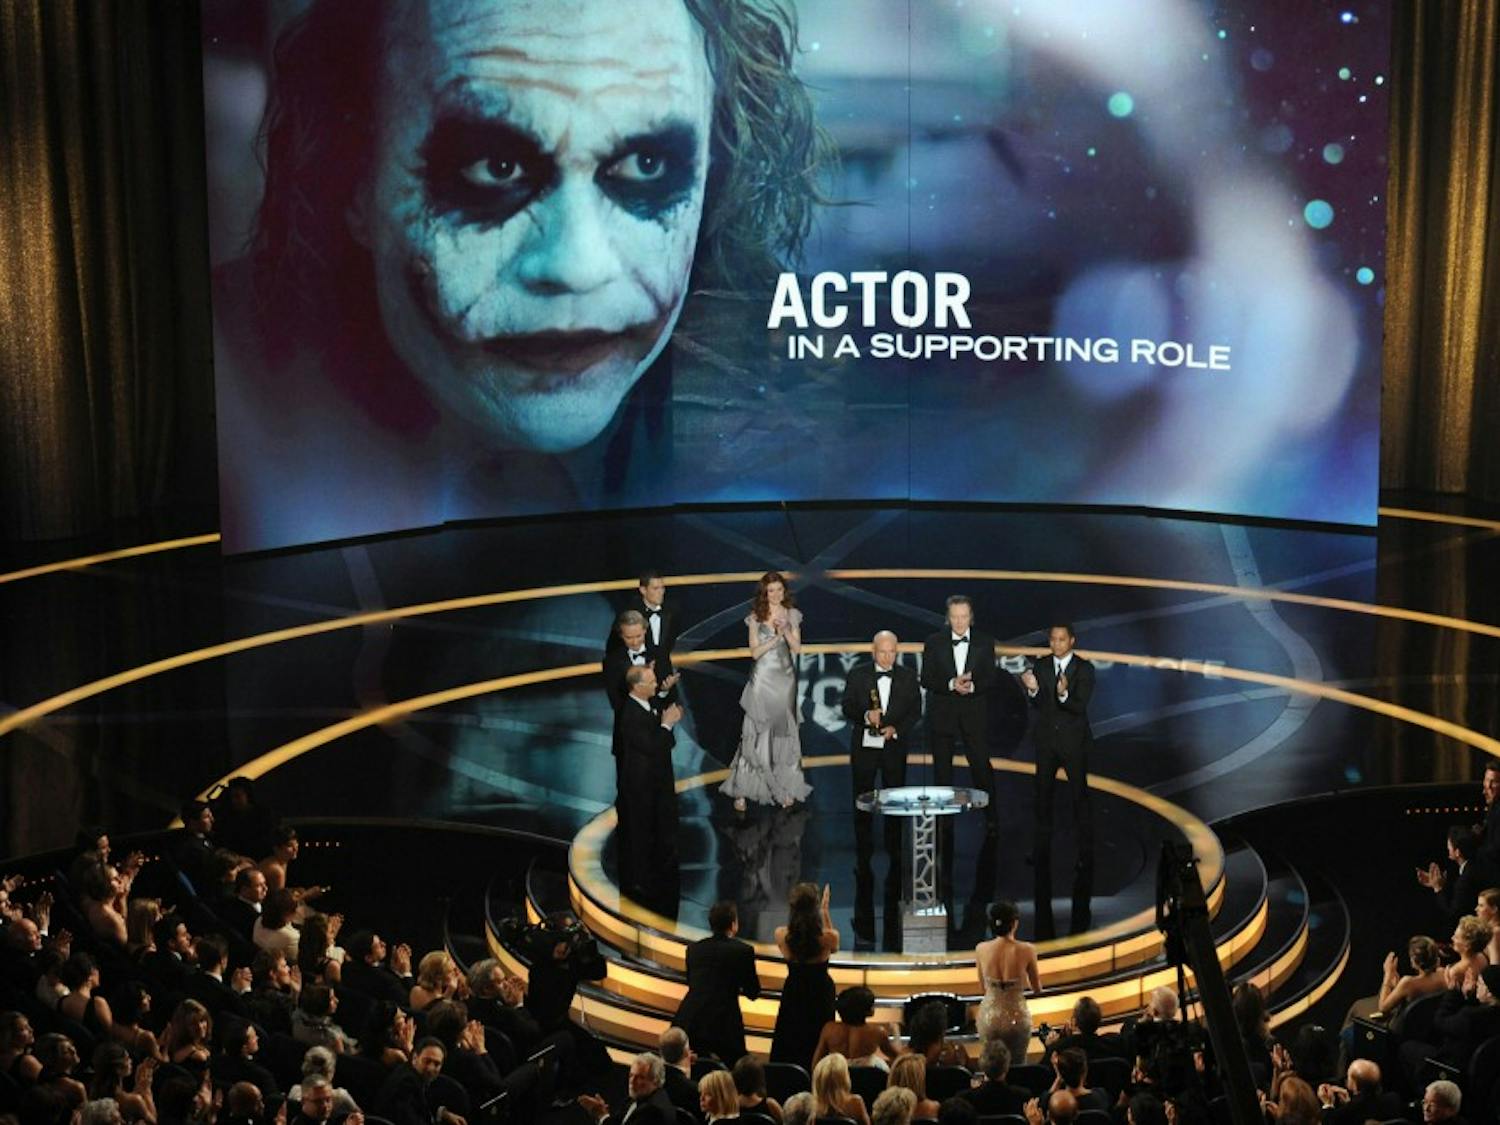 Heath Ledger's father Kim Ledger accepts the Oscar for best supporting actor on behalf of Heath Ledger who won for his work in "The Dark Knight" during the 81st Academy Awards in Hollywood, California, Sunday, February 22, 2009. (Michael Goulding/Orange County Register/MCT)